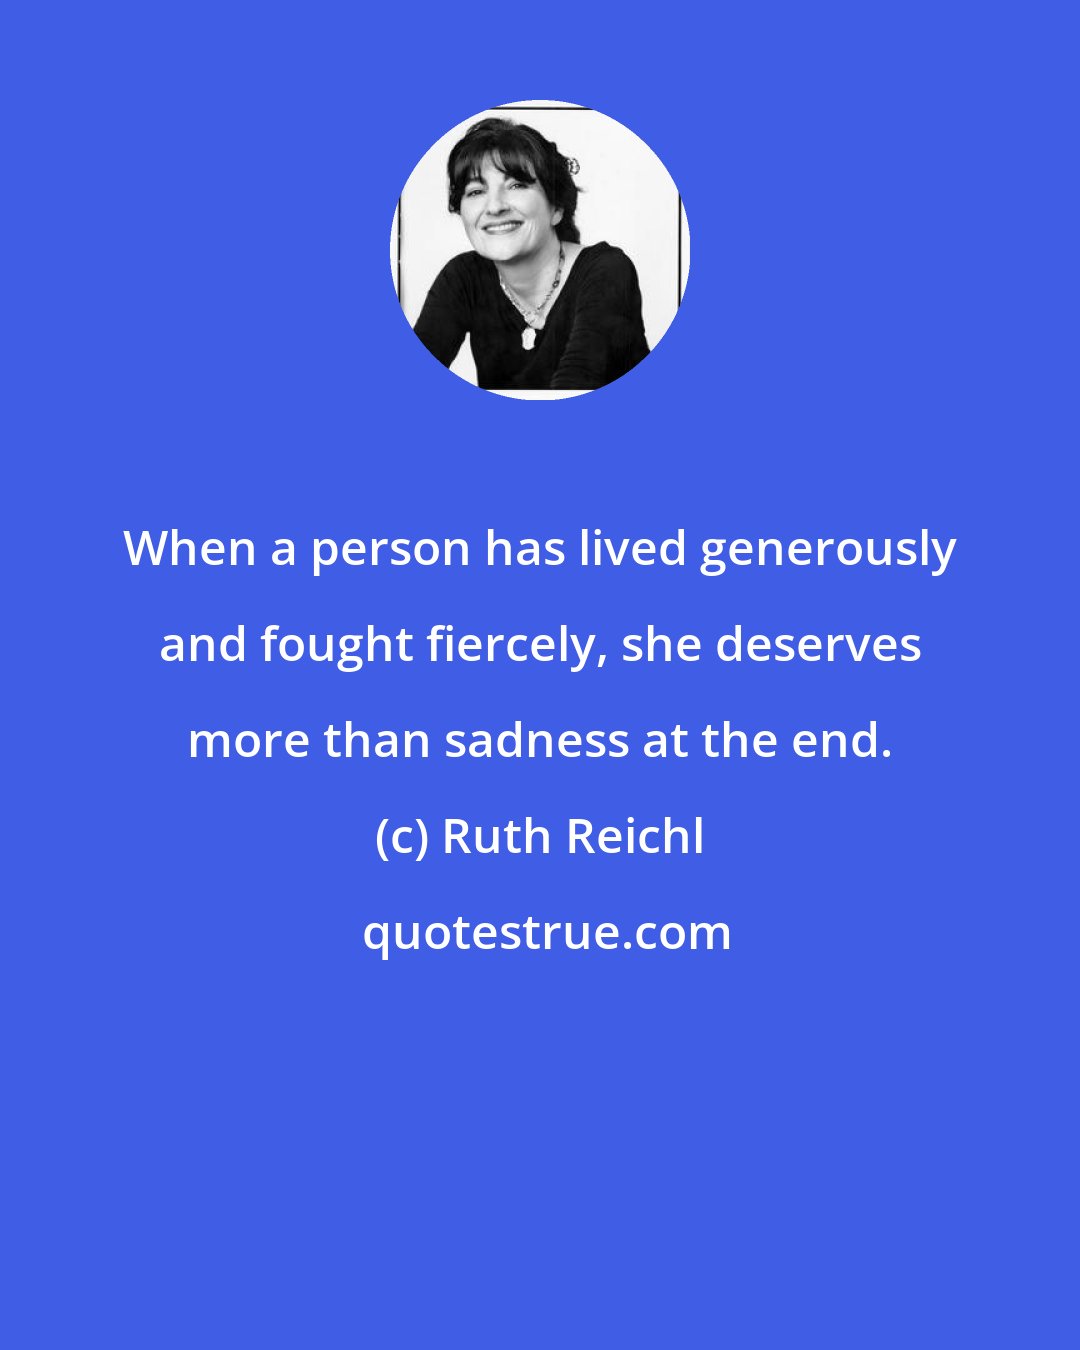 Ruth Reichl: When a person has lived generously and fought fiercely, she deserves more than sadness at the end.